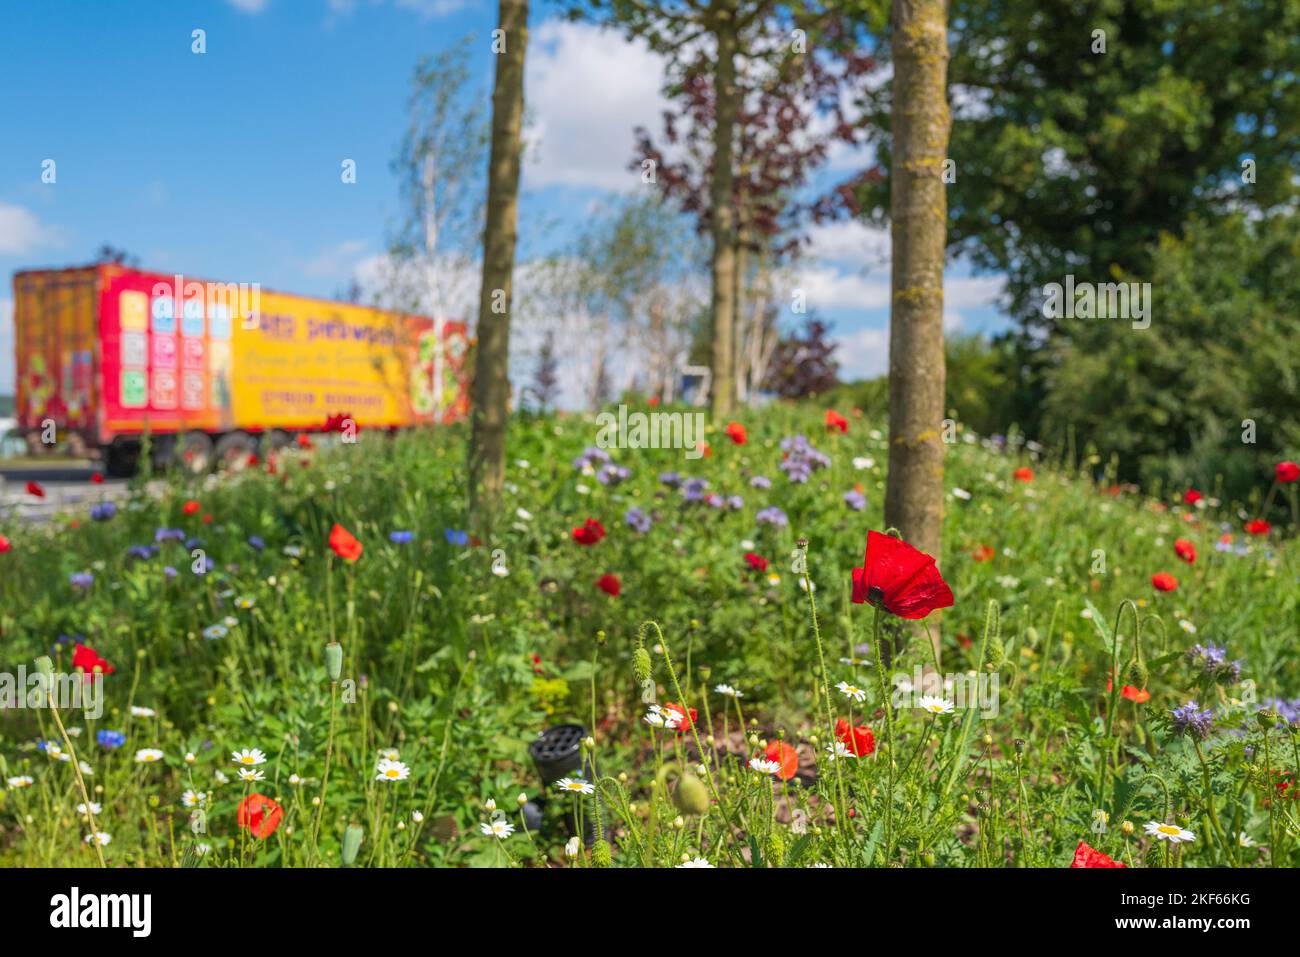 Wildflowers on a grass verge with traffic passing by. Stock Photo